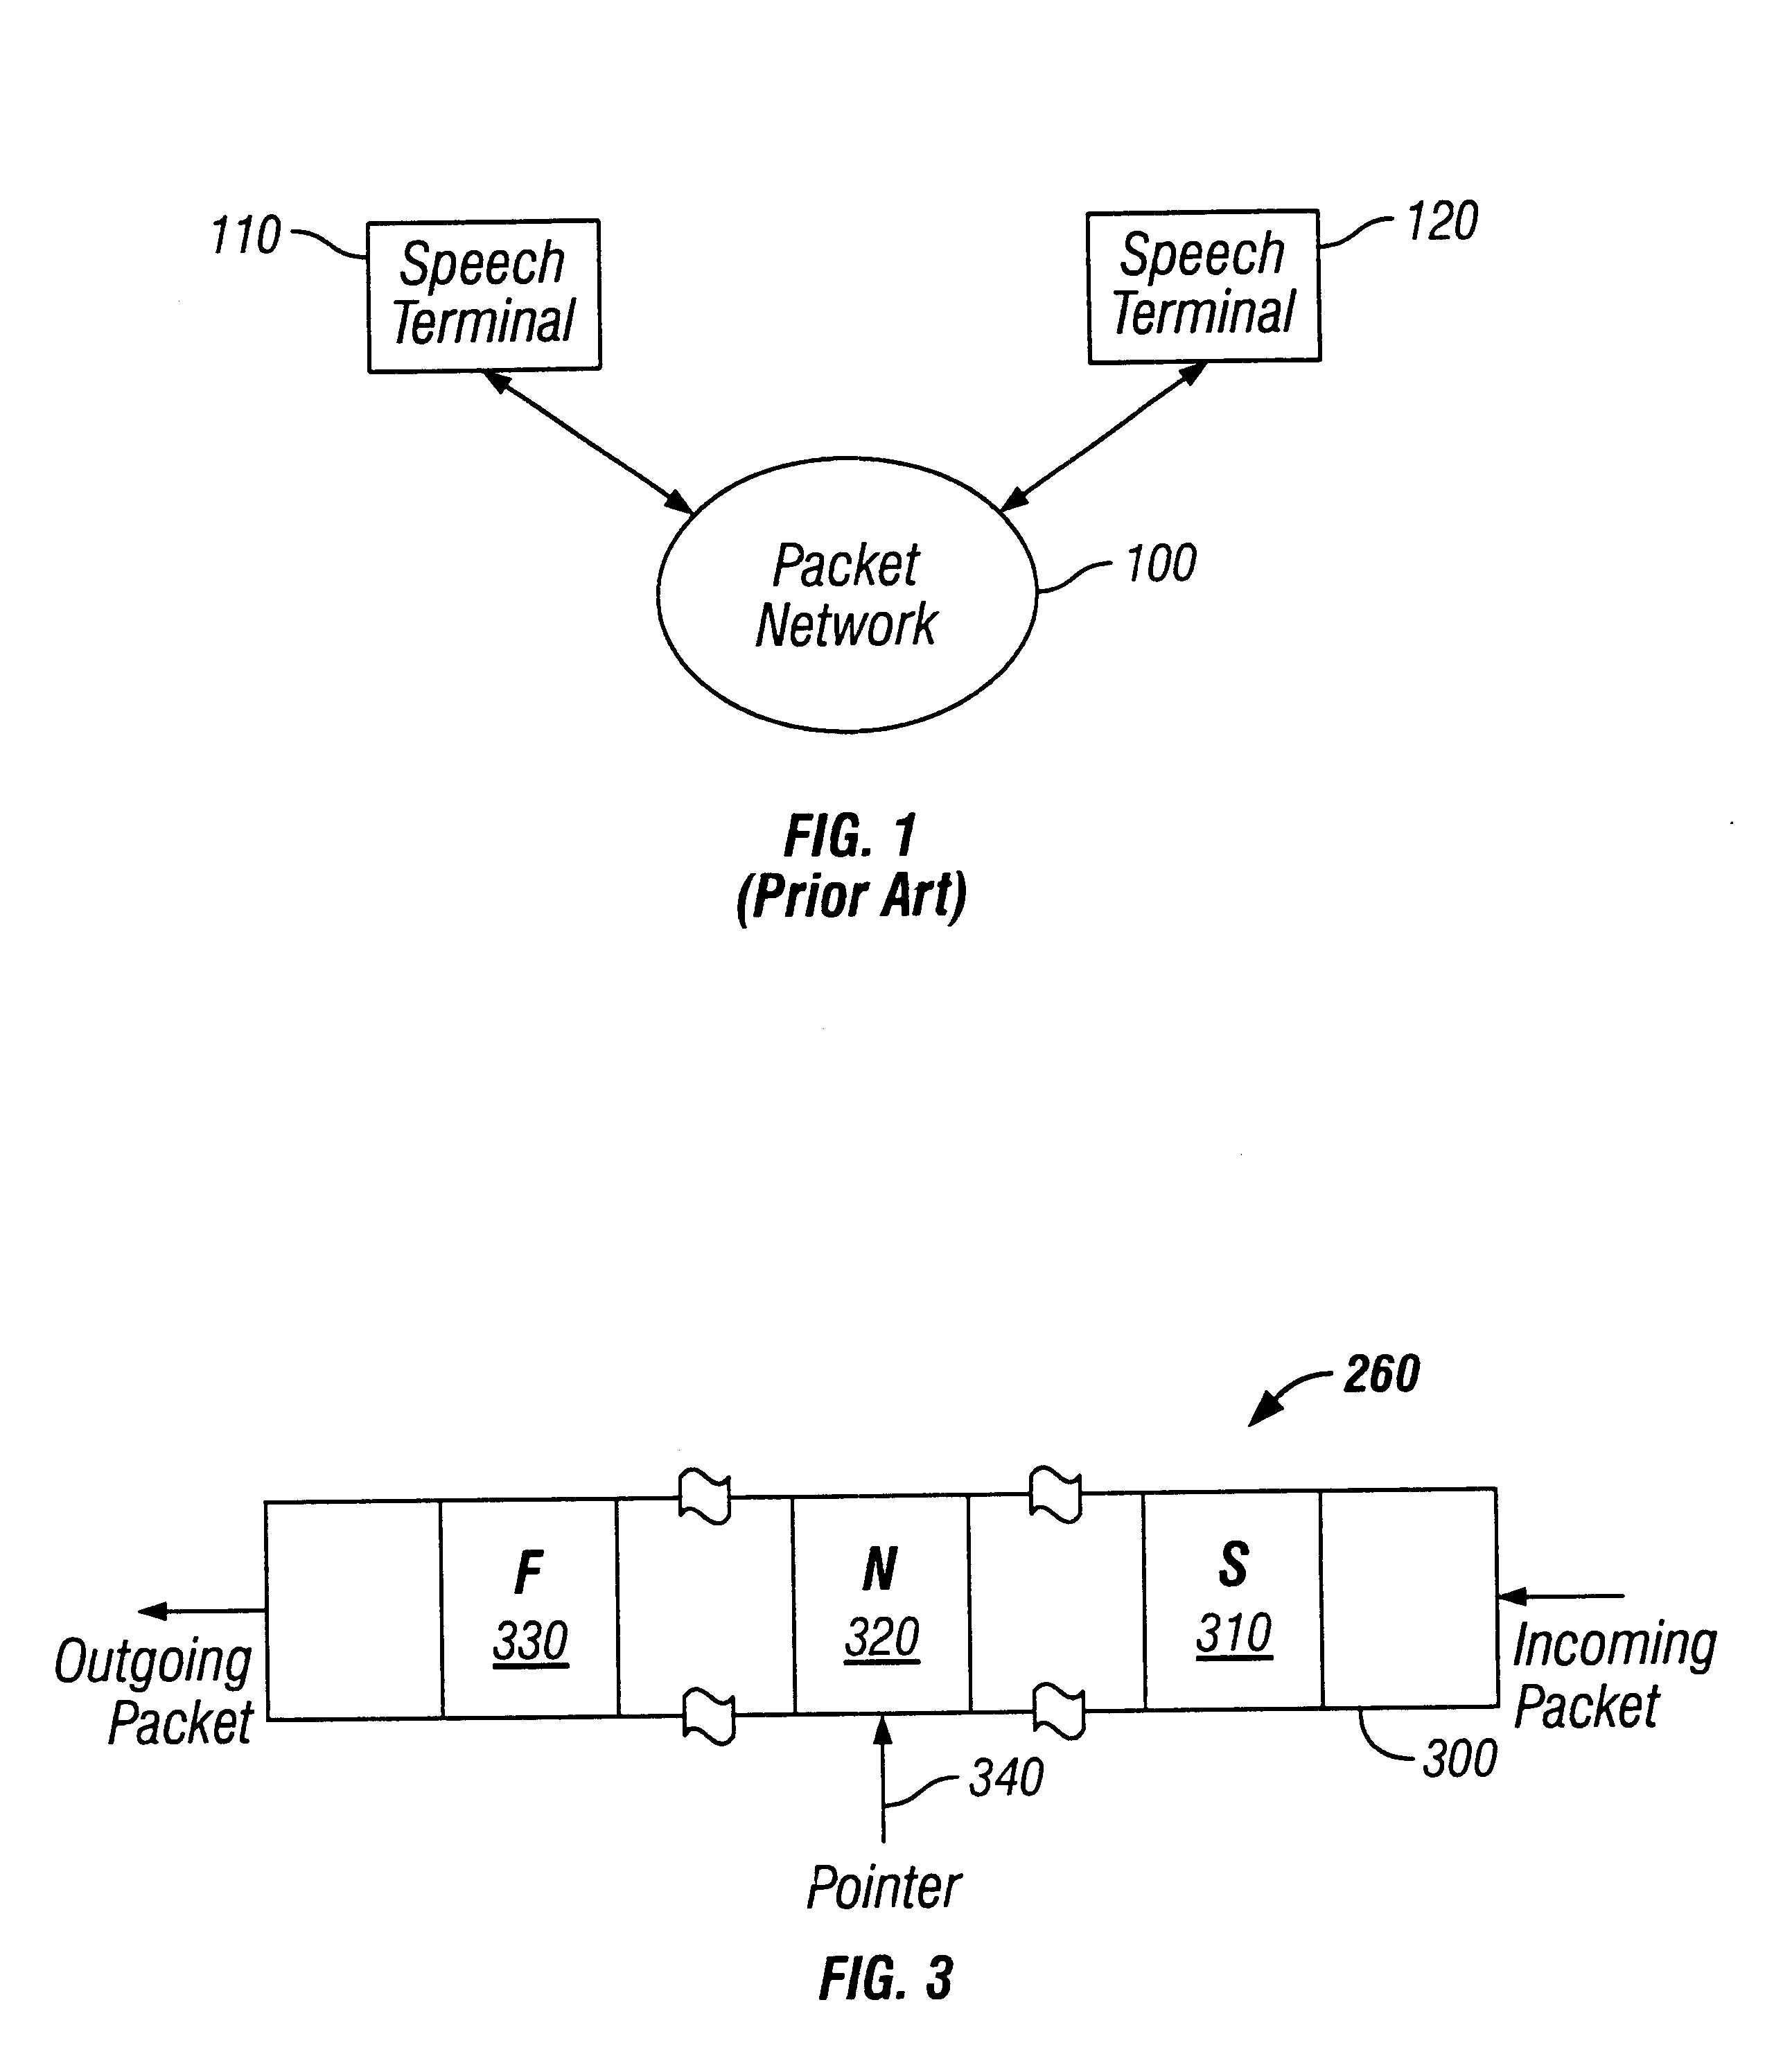 Speech manipulation for continuous speech playback over a packet network